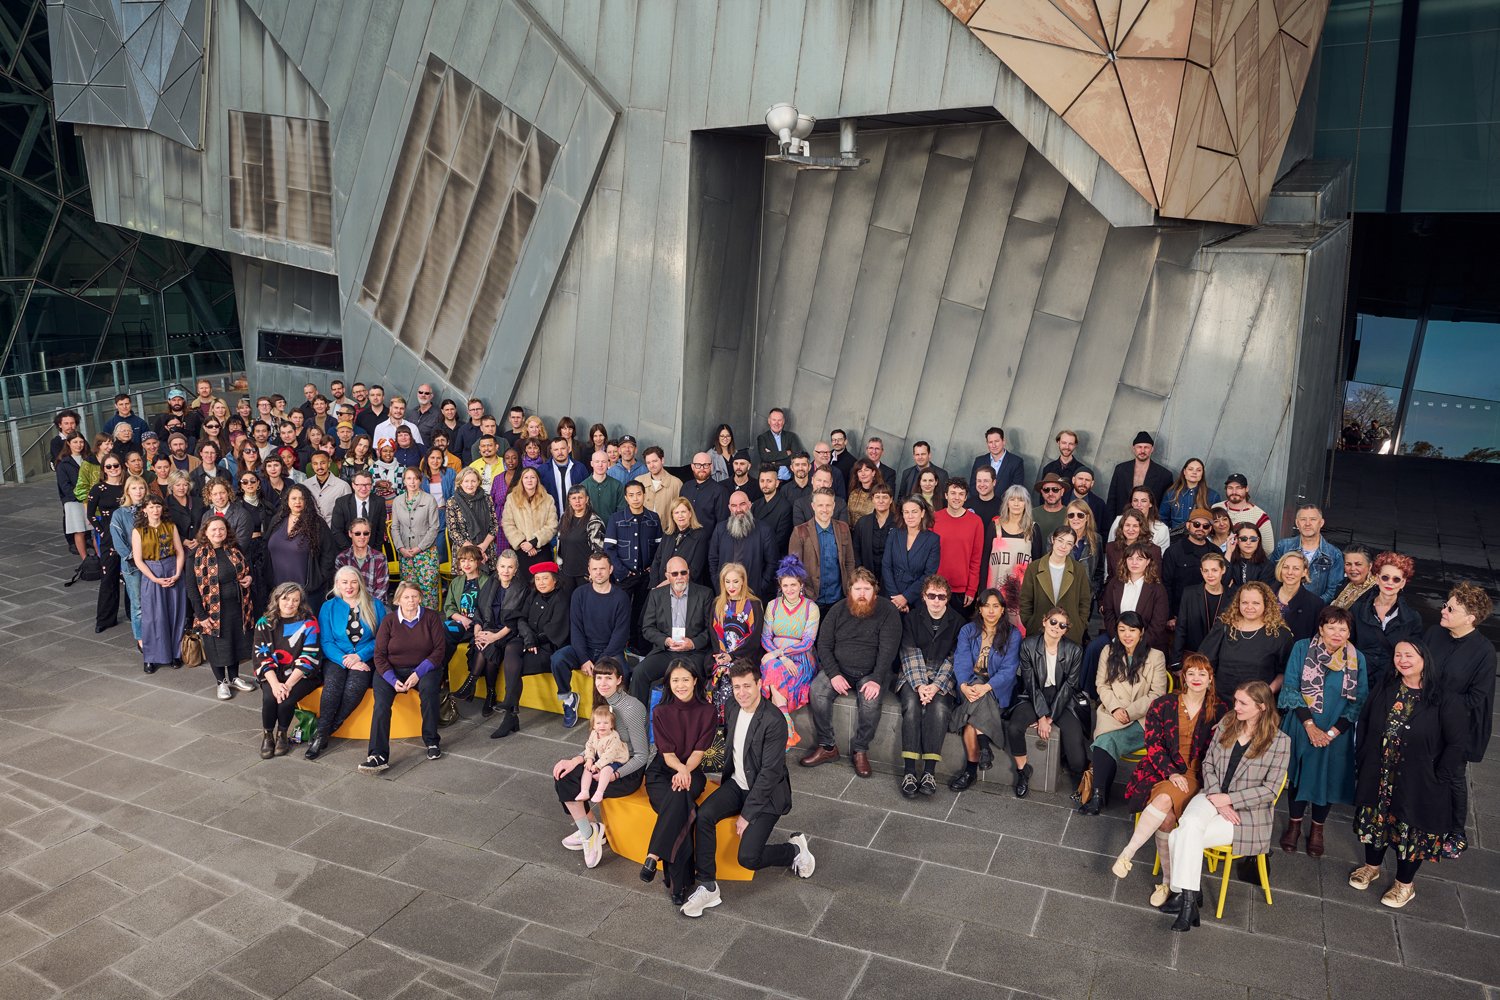  Official image courtesy NGV:  Melbourne Now 2023  artists and designers at the announcement event on the 18th October.  Melbourne Now 2023  will open on the 24th March, 2023 at The Ian Potter Centre: NGV Australia. Photo: Eugene Hyland 